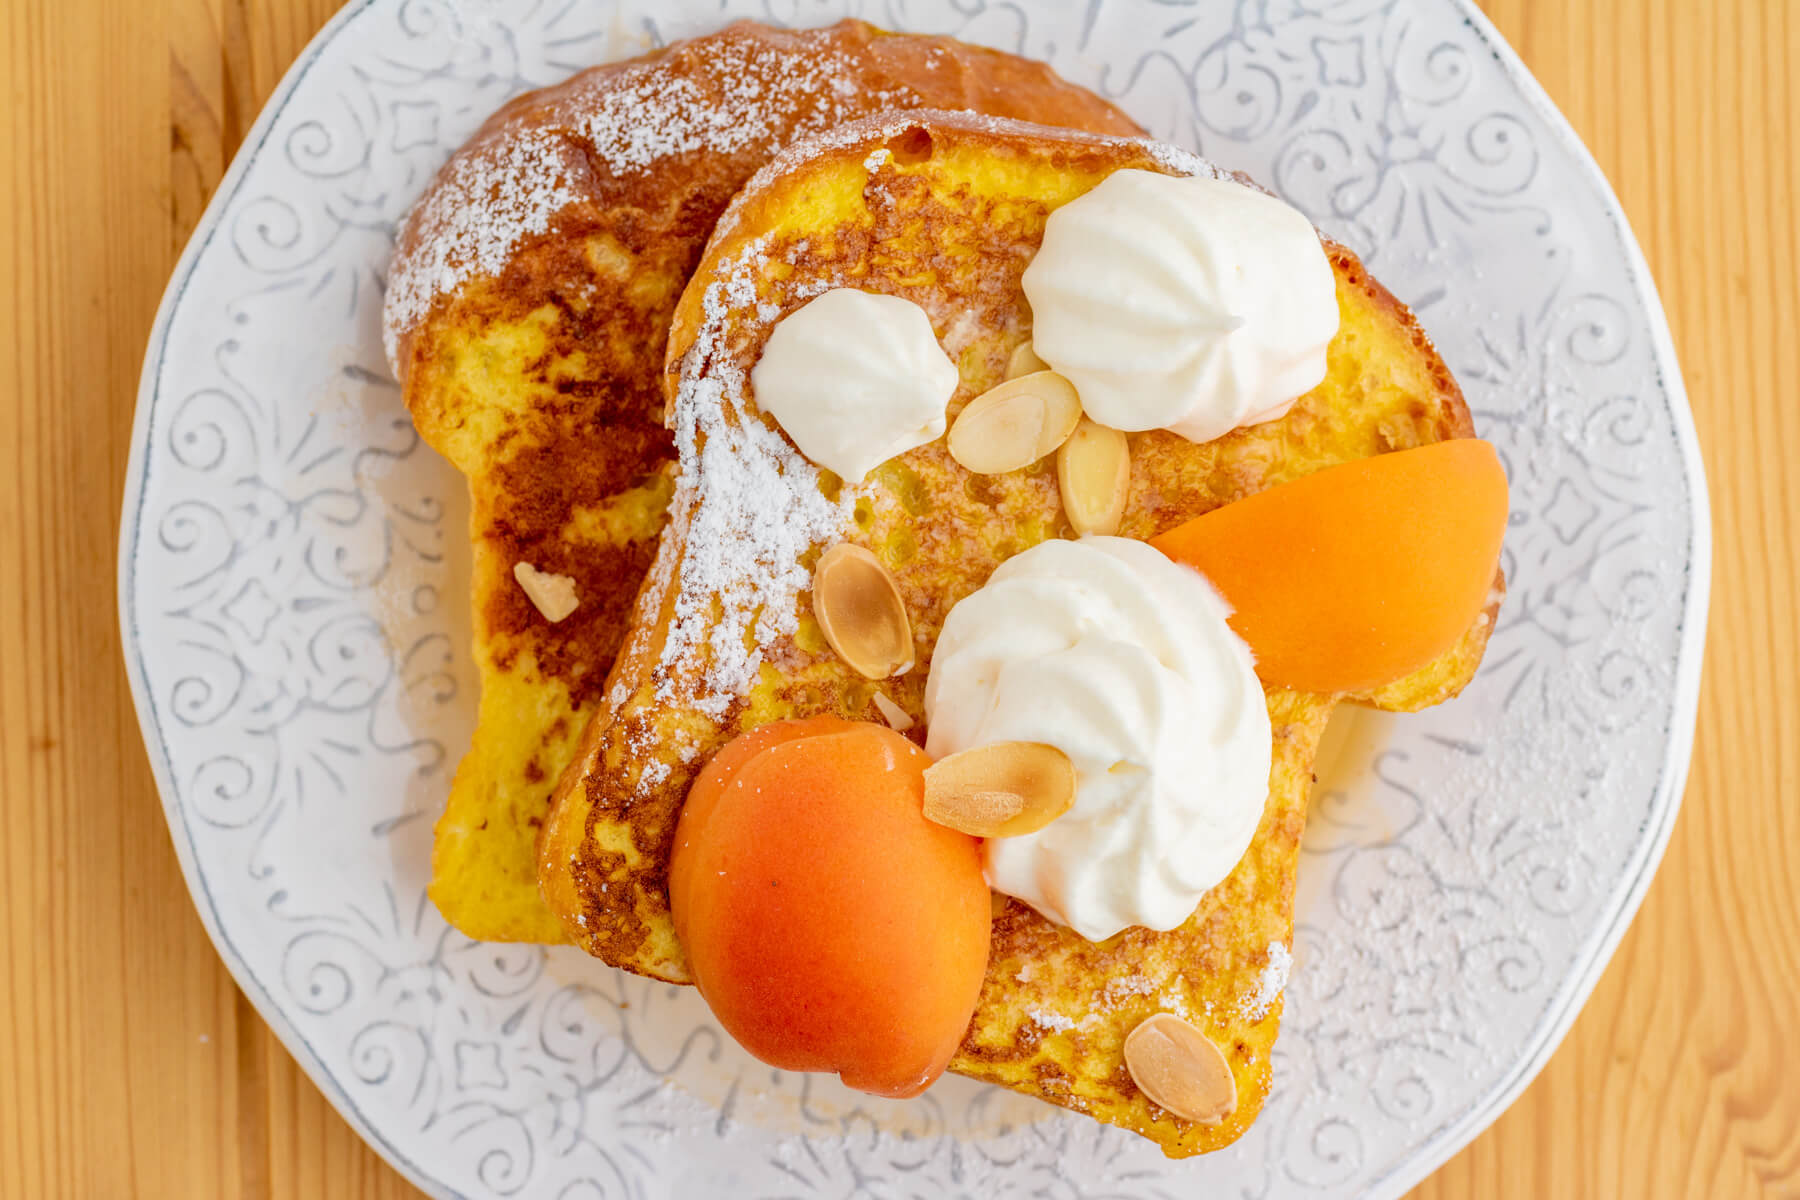 Two slices of golden Brioche French toast with whipped mascarpone cheese and fresh apricot slices on a white plate.